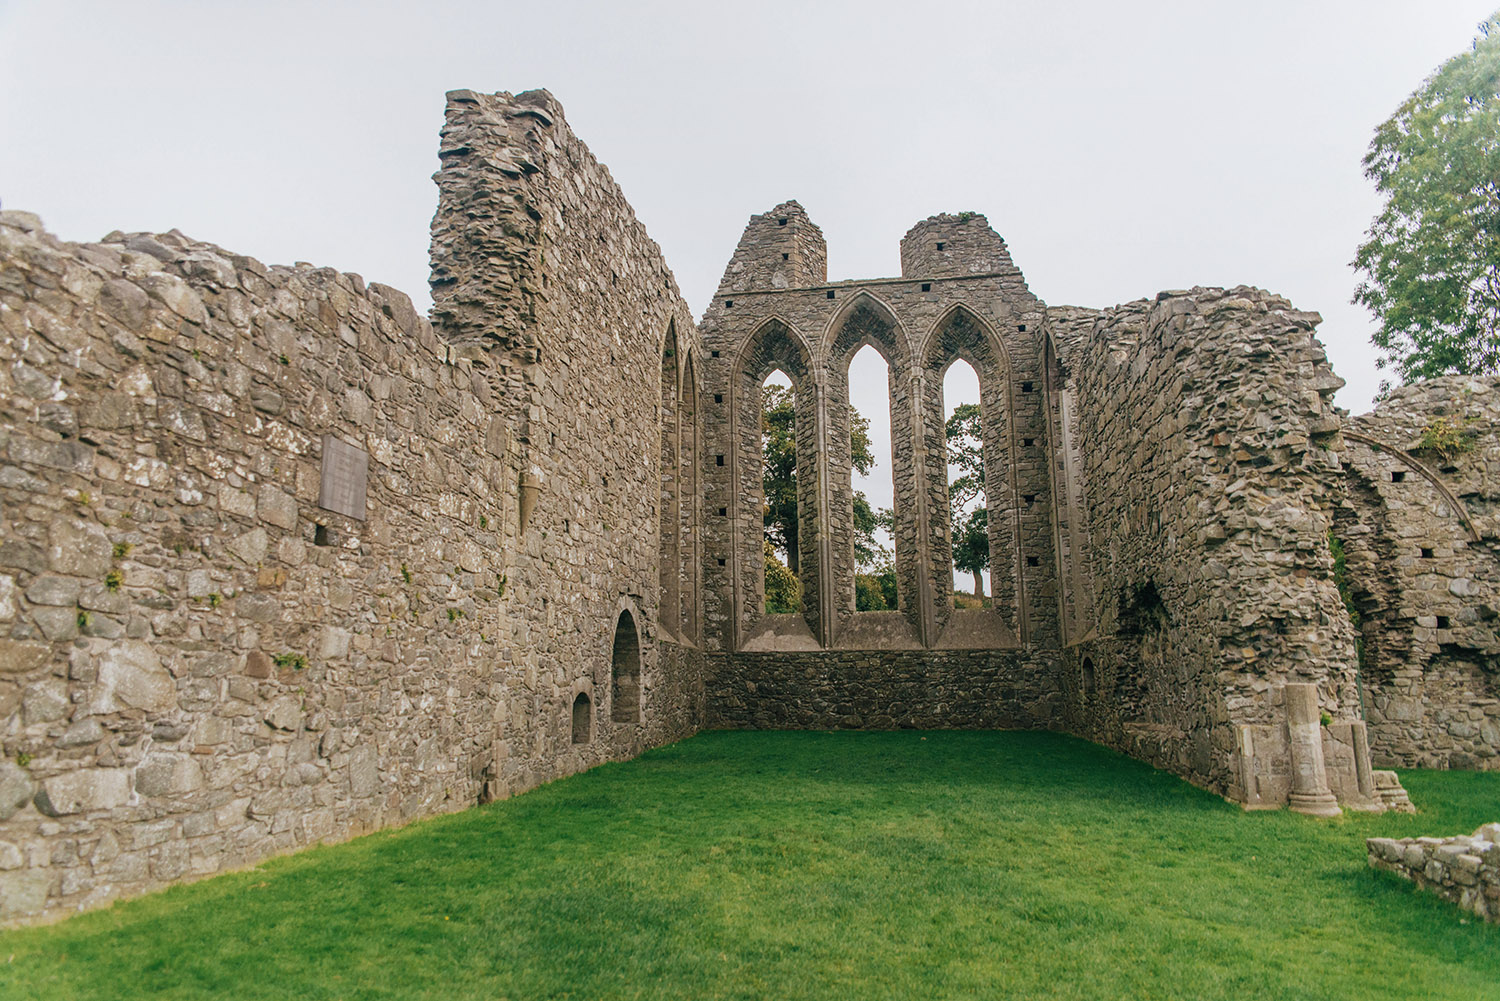 The Twins - Inch Abbey